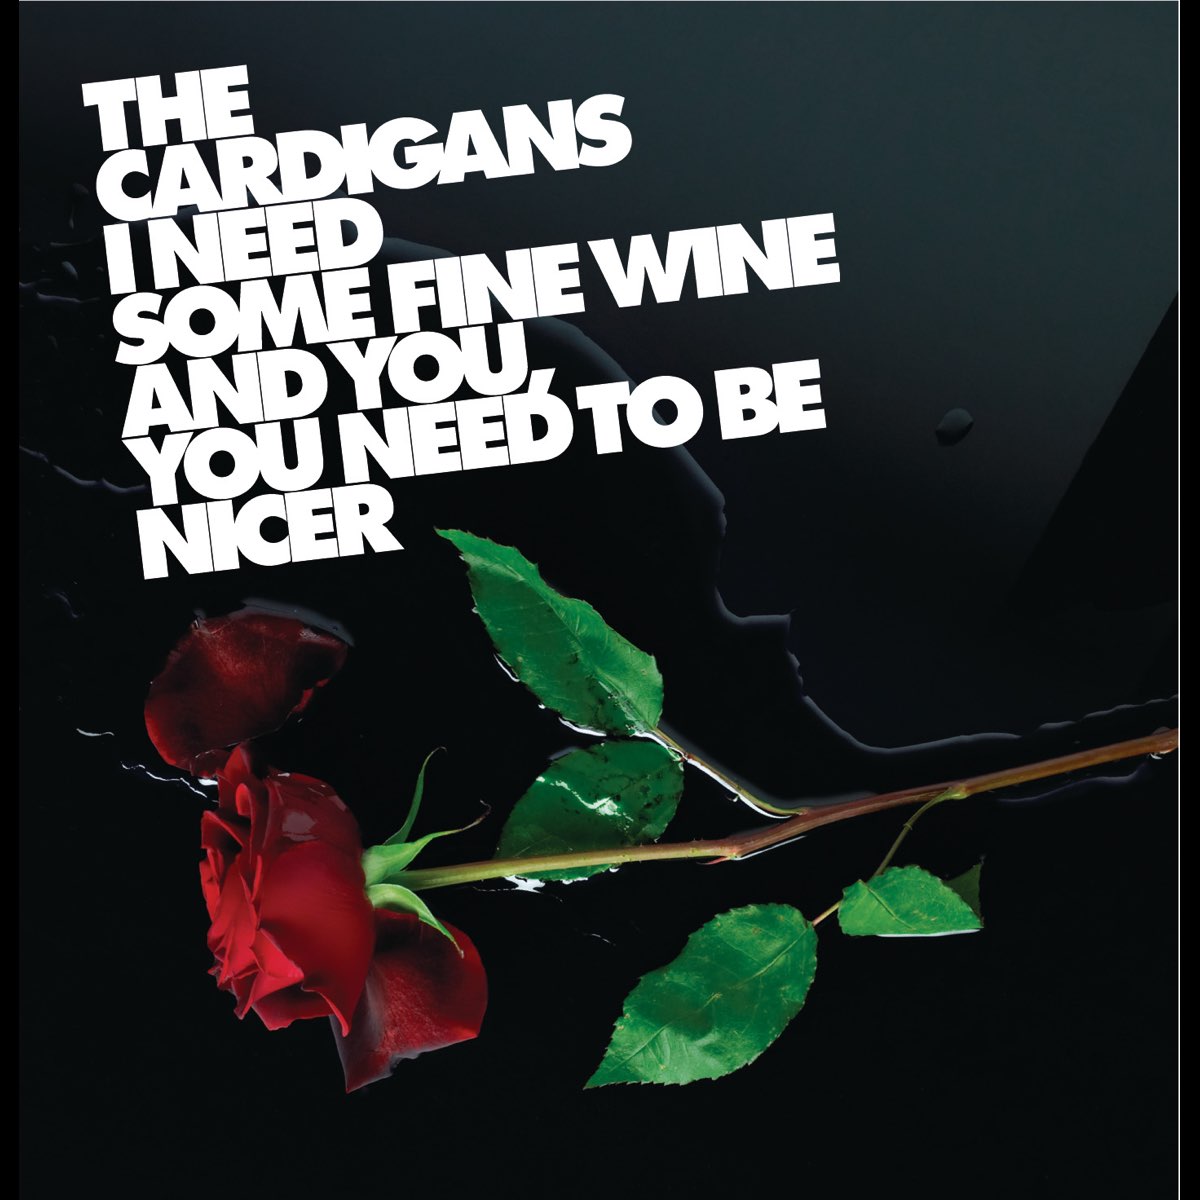 The Cardigans — I Need Some Fine Wine And You, You Need To Be Nicer cover artwork